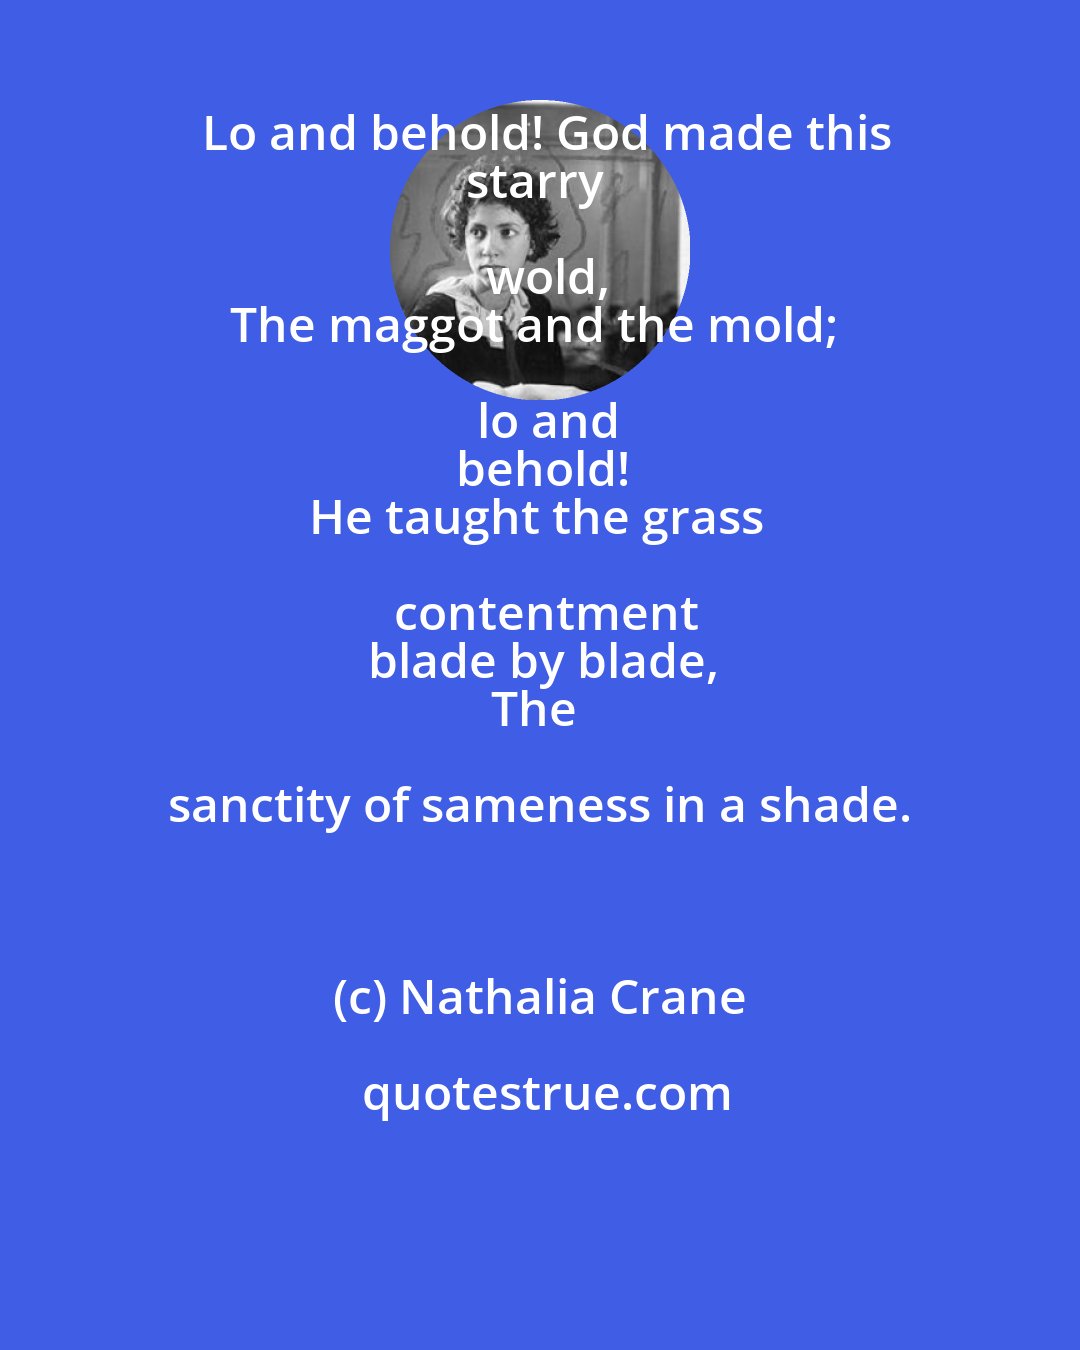 Nathalia Crane: Lo and behold! God made this
starry wold,
The maggot and the mold; lo and
behold!
He taught the grass contentment
blade by blade,
The sanctity of sameness in a shade.